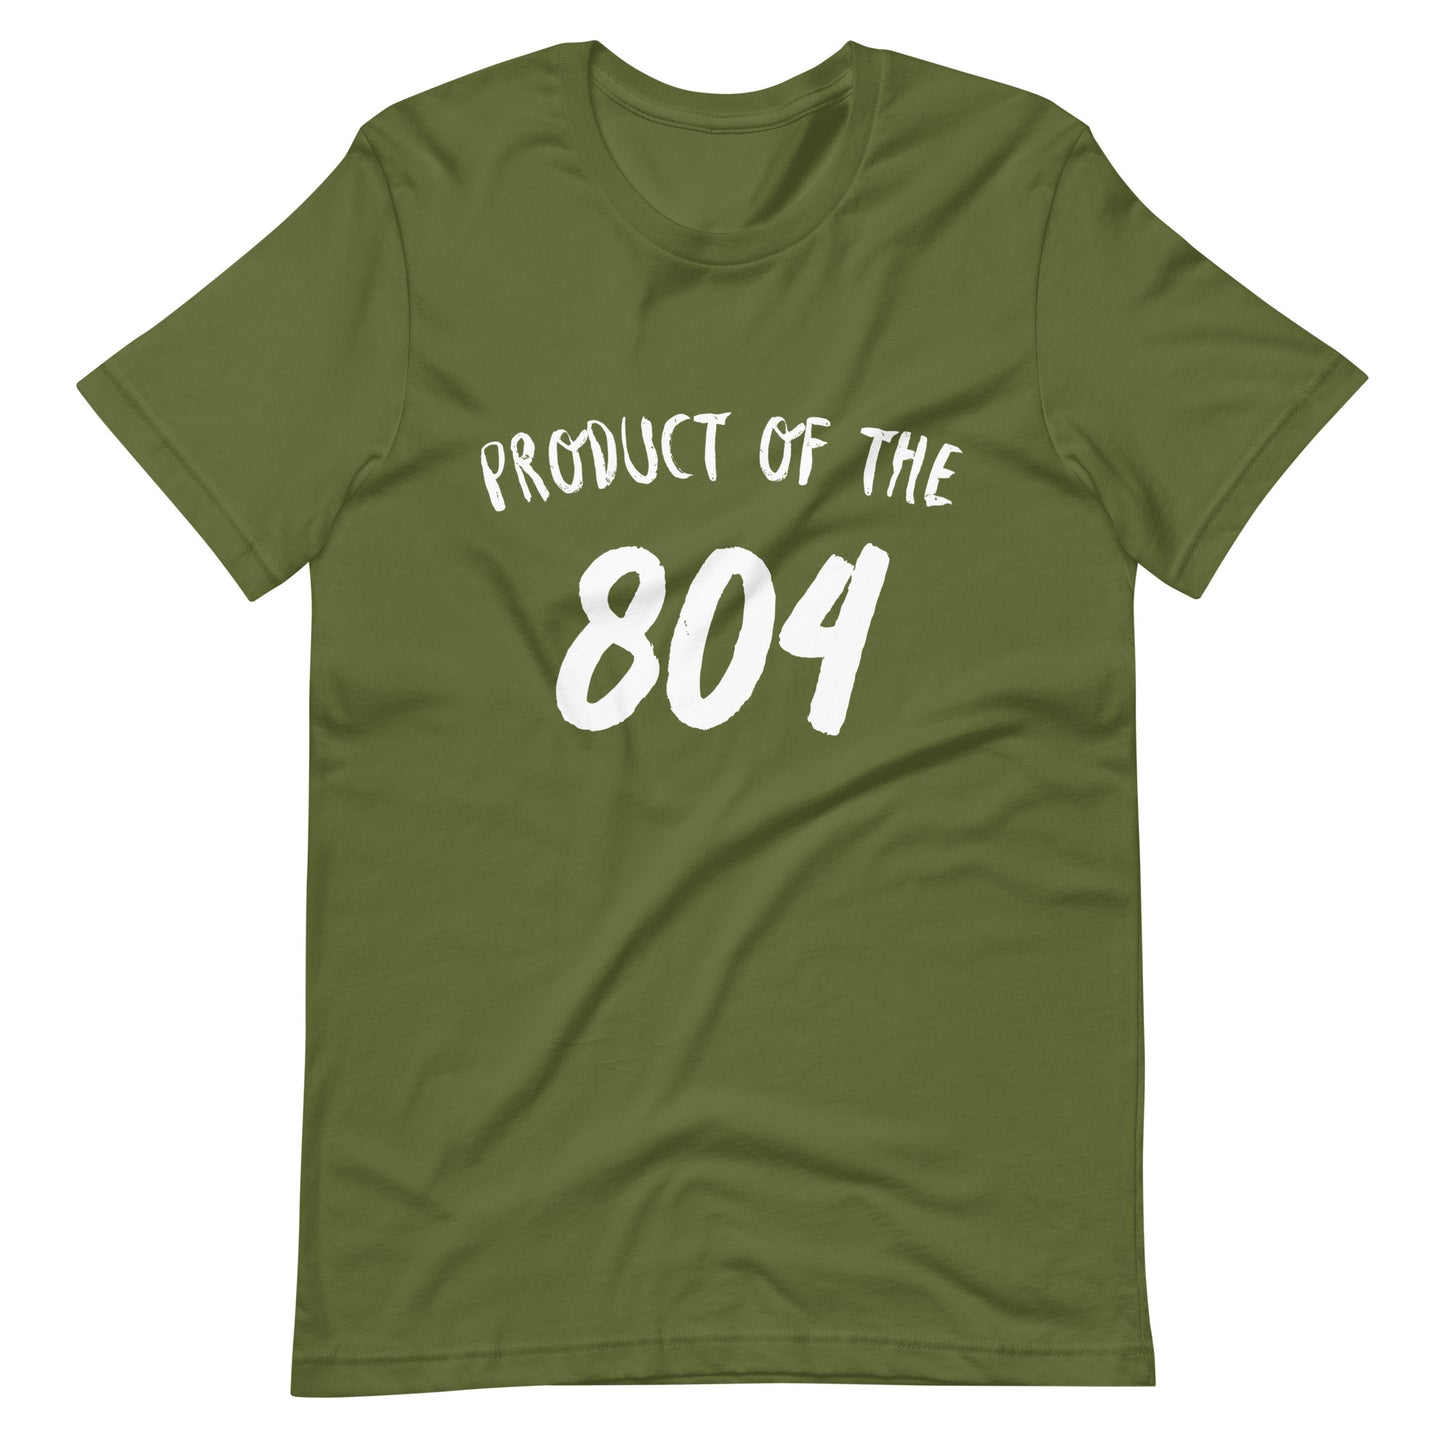 Product of the "804" Unisex t-shirt